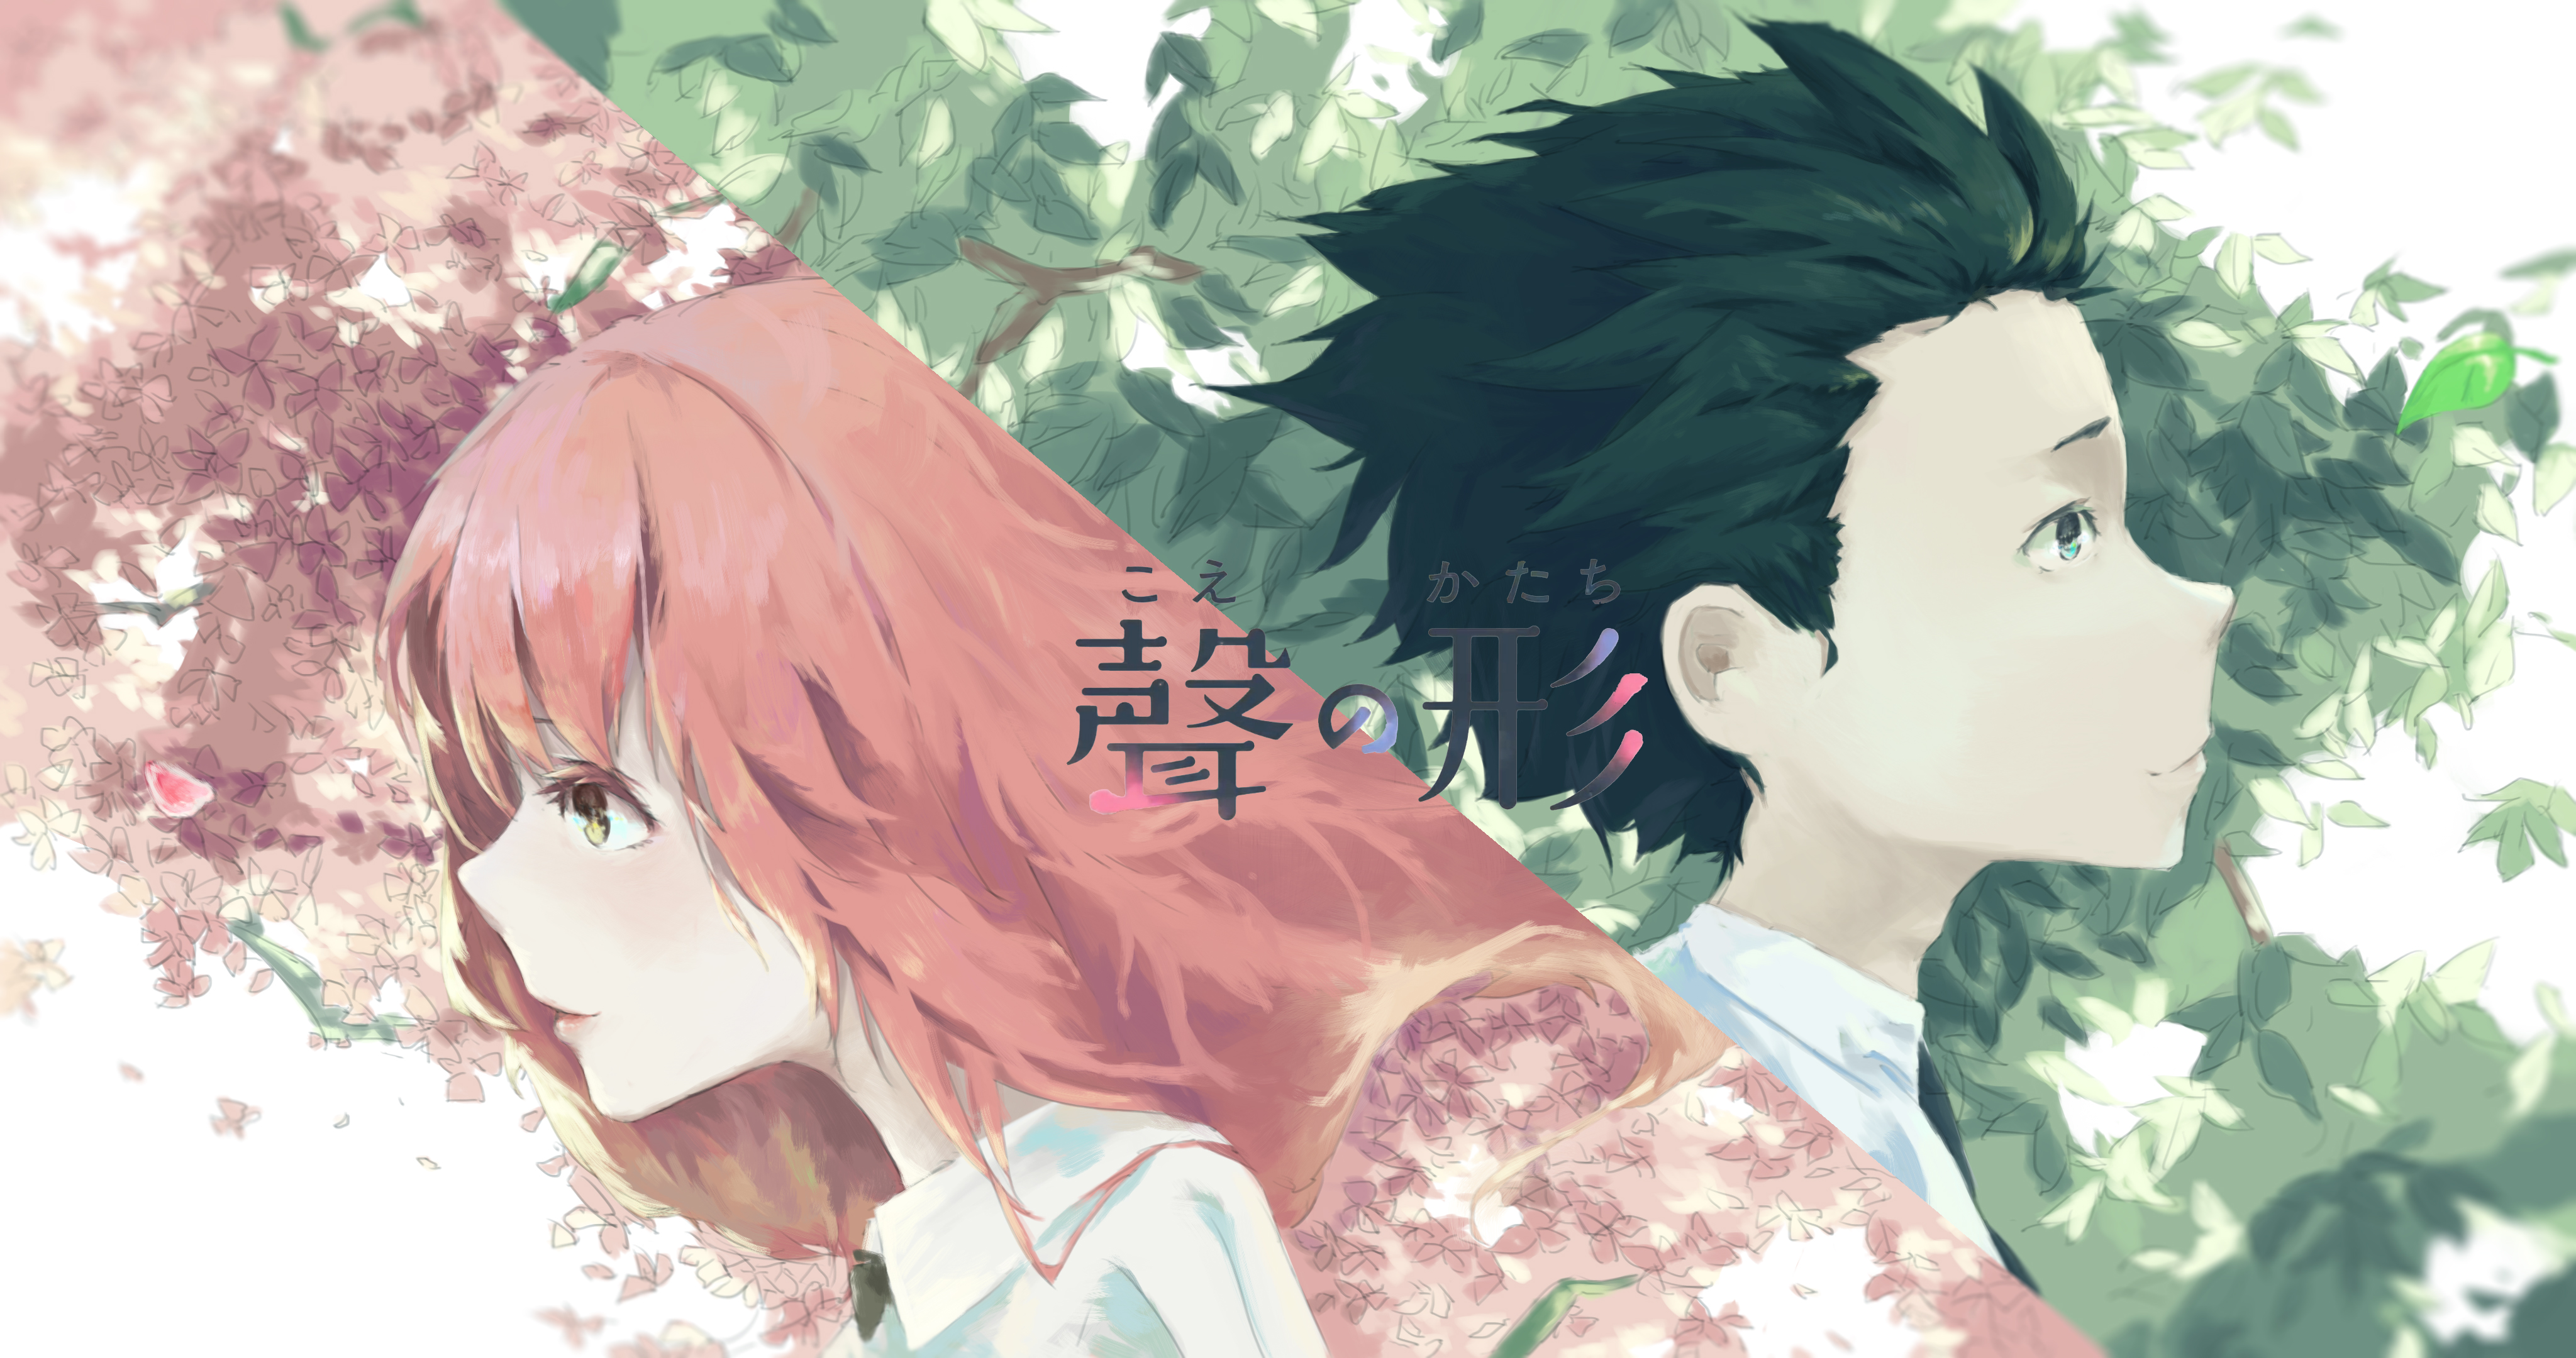 Koe No Katachi Wallpapers, Pictures, Images